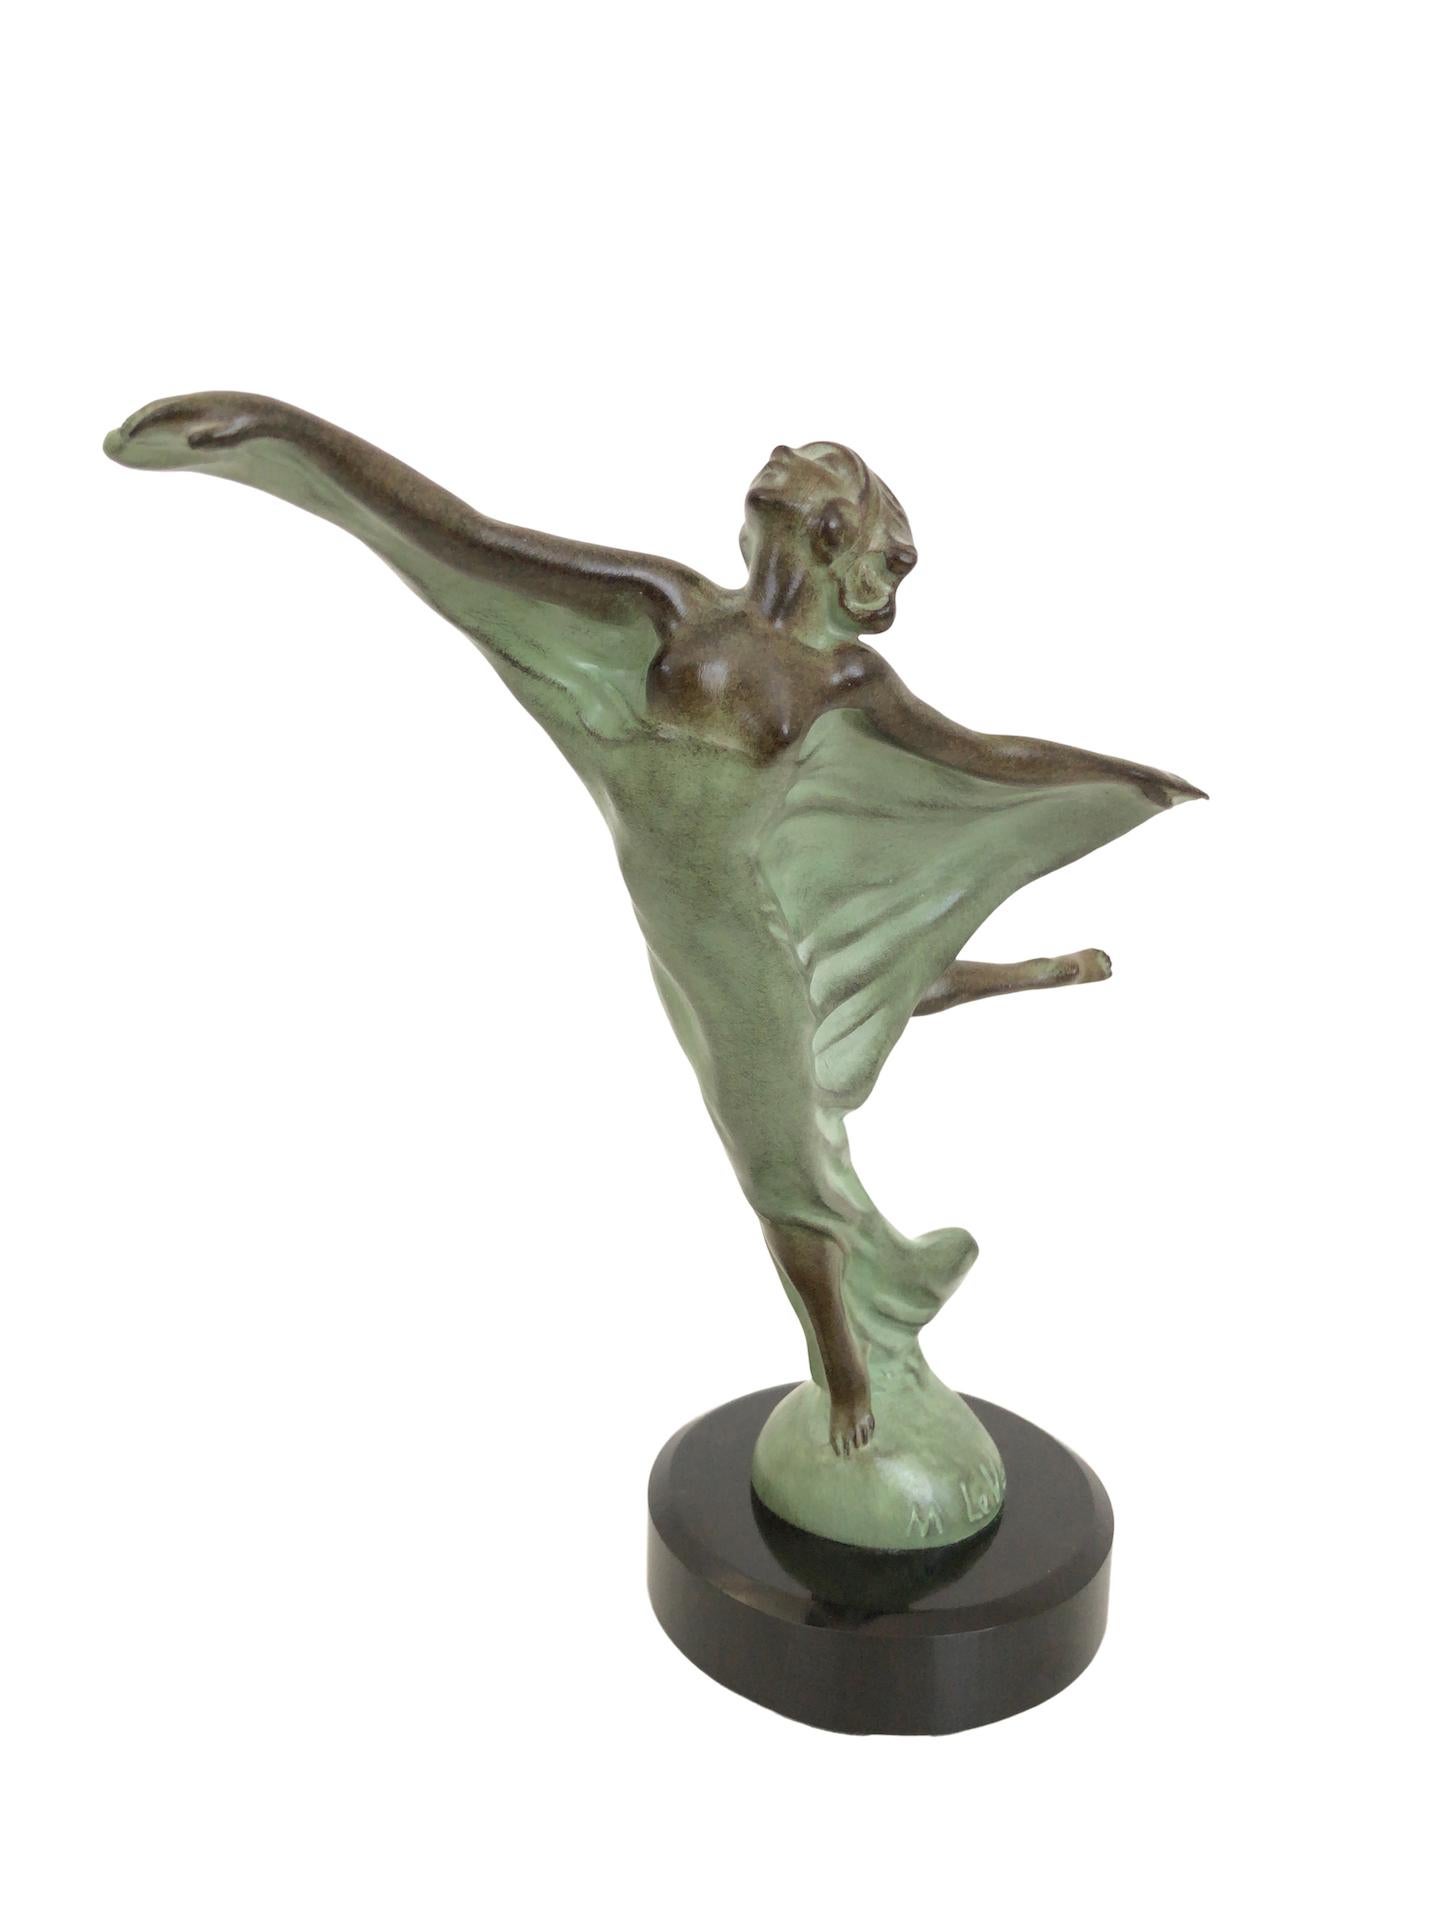 Spelter Sculpture Envol Dancer French Art Deco Style Radiator Mascot from Max Le Verrier